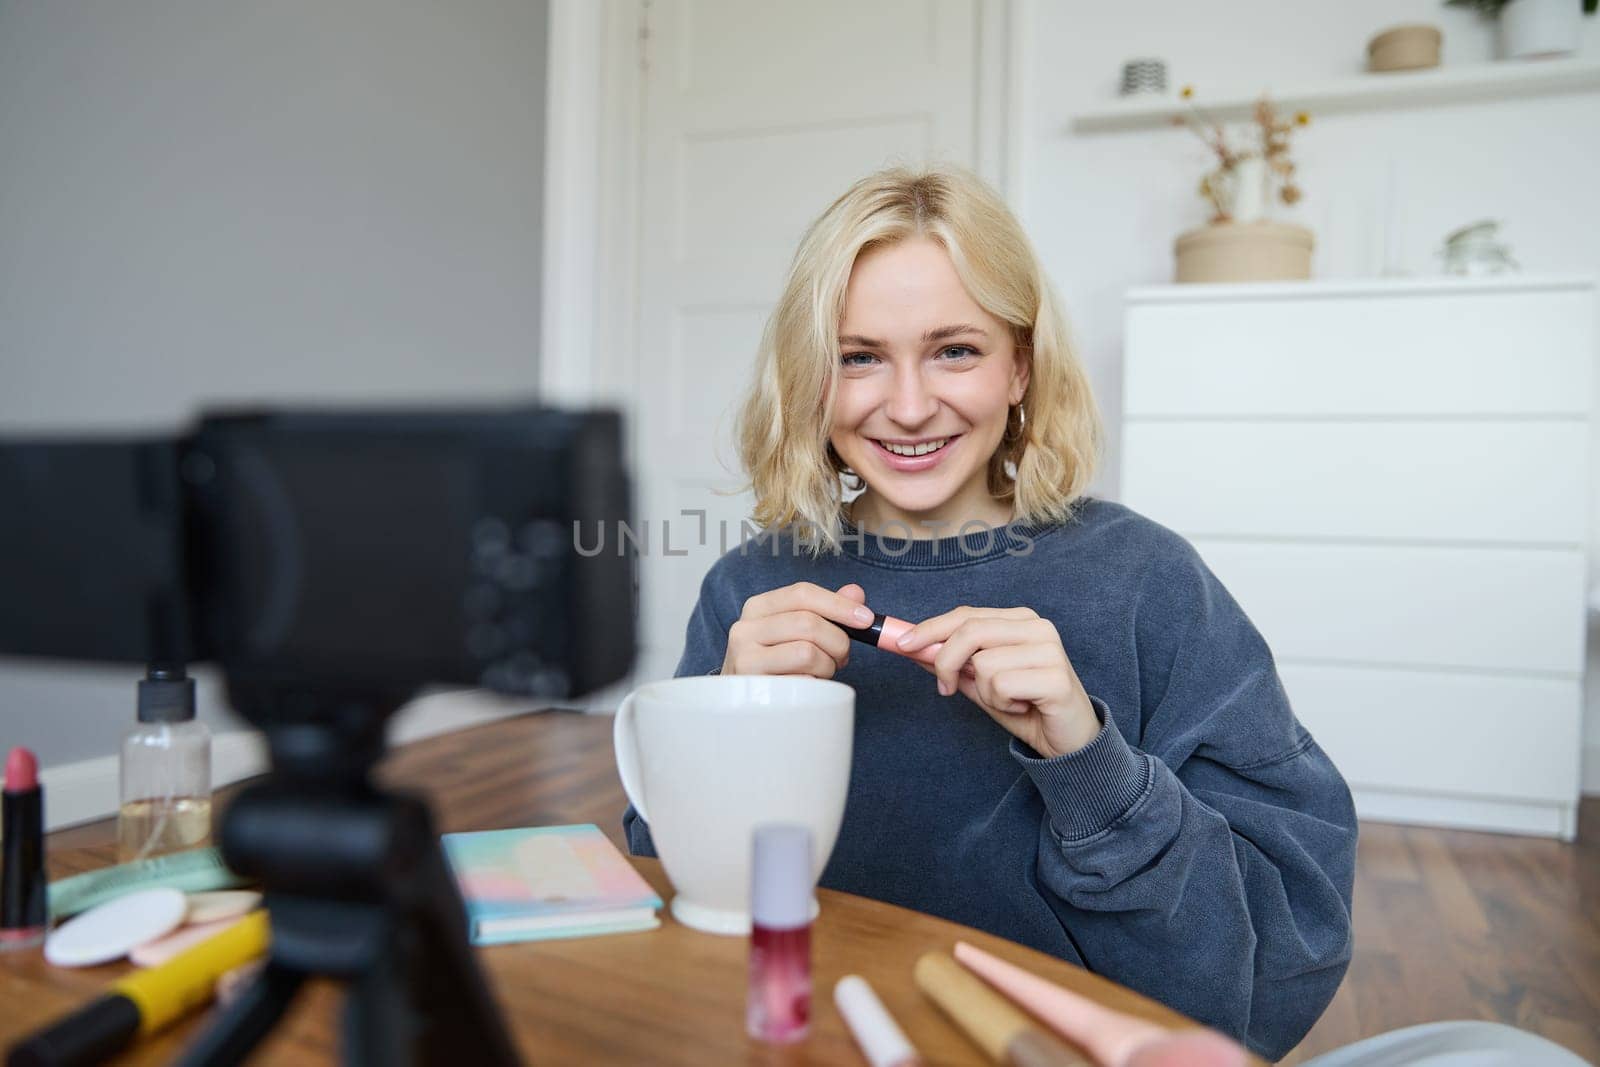 Portrait of blond smiling woman records a lifestyle blog, vlogger or makeup artist recording video for social media, holding mascara, reviewing beauty products for followers online.